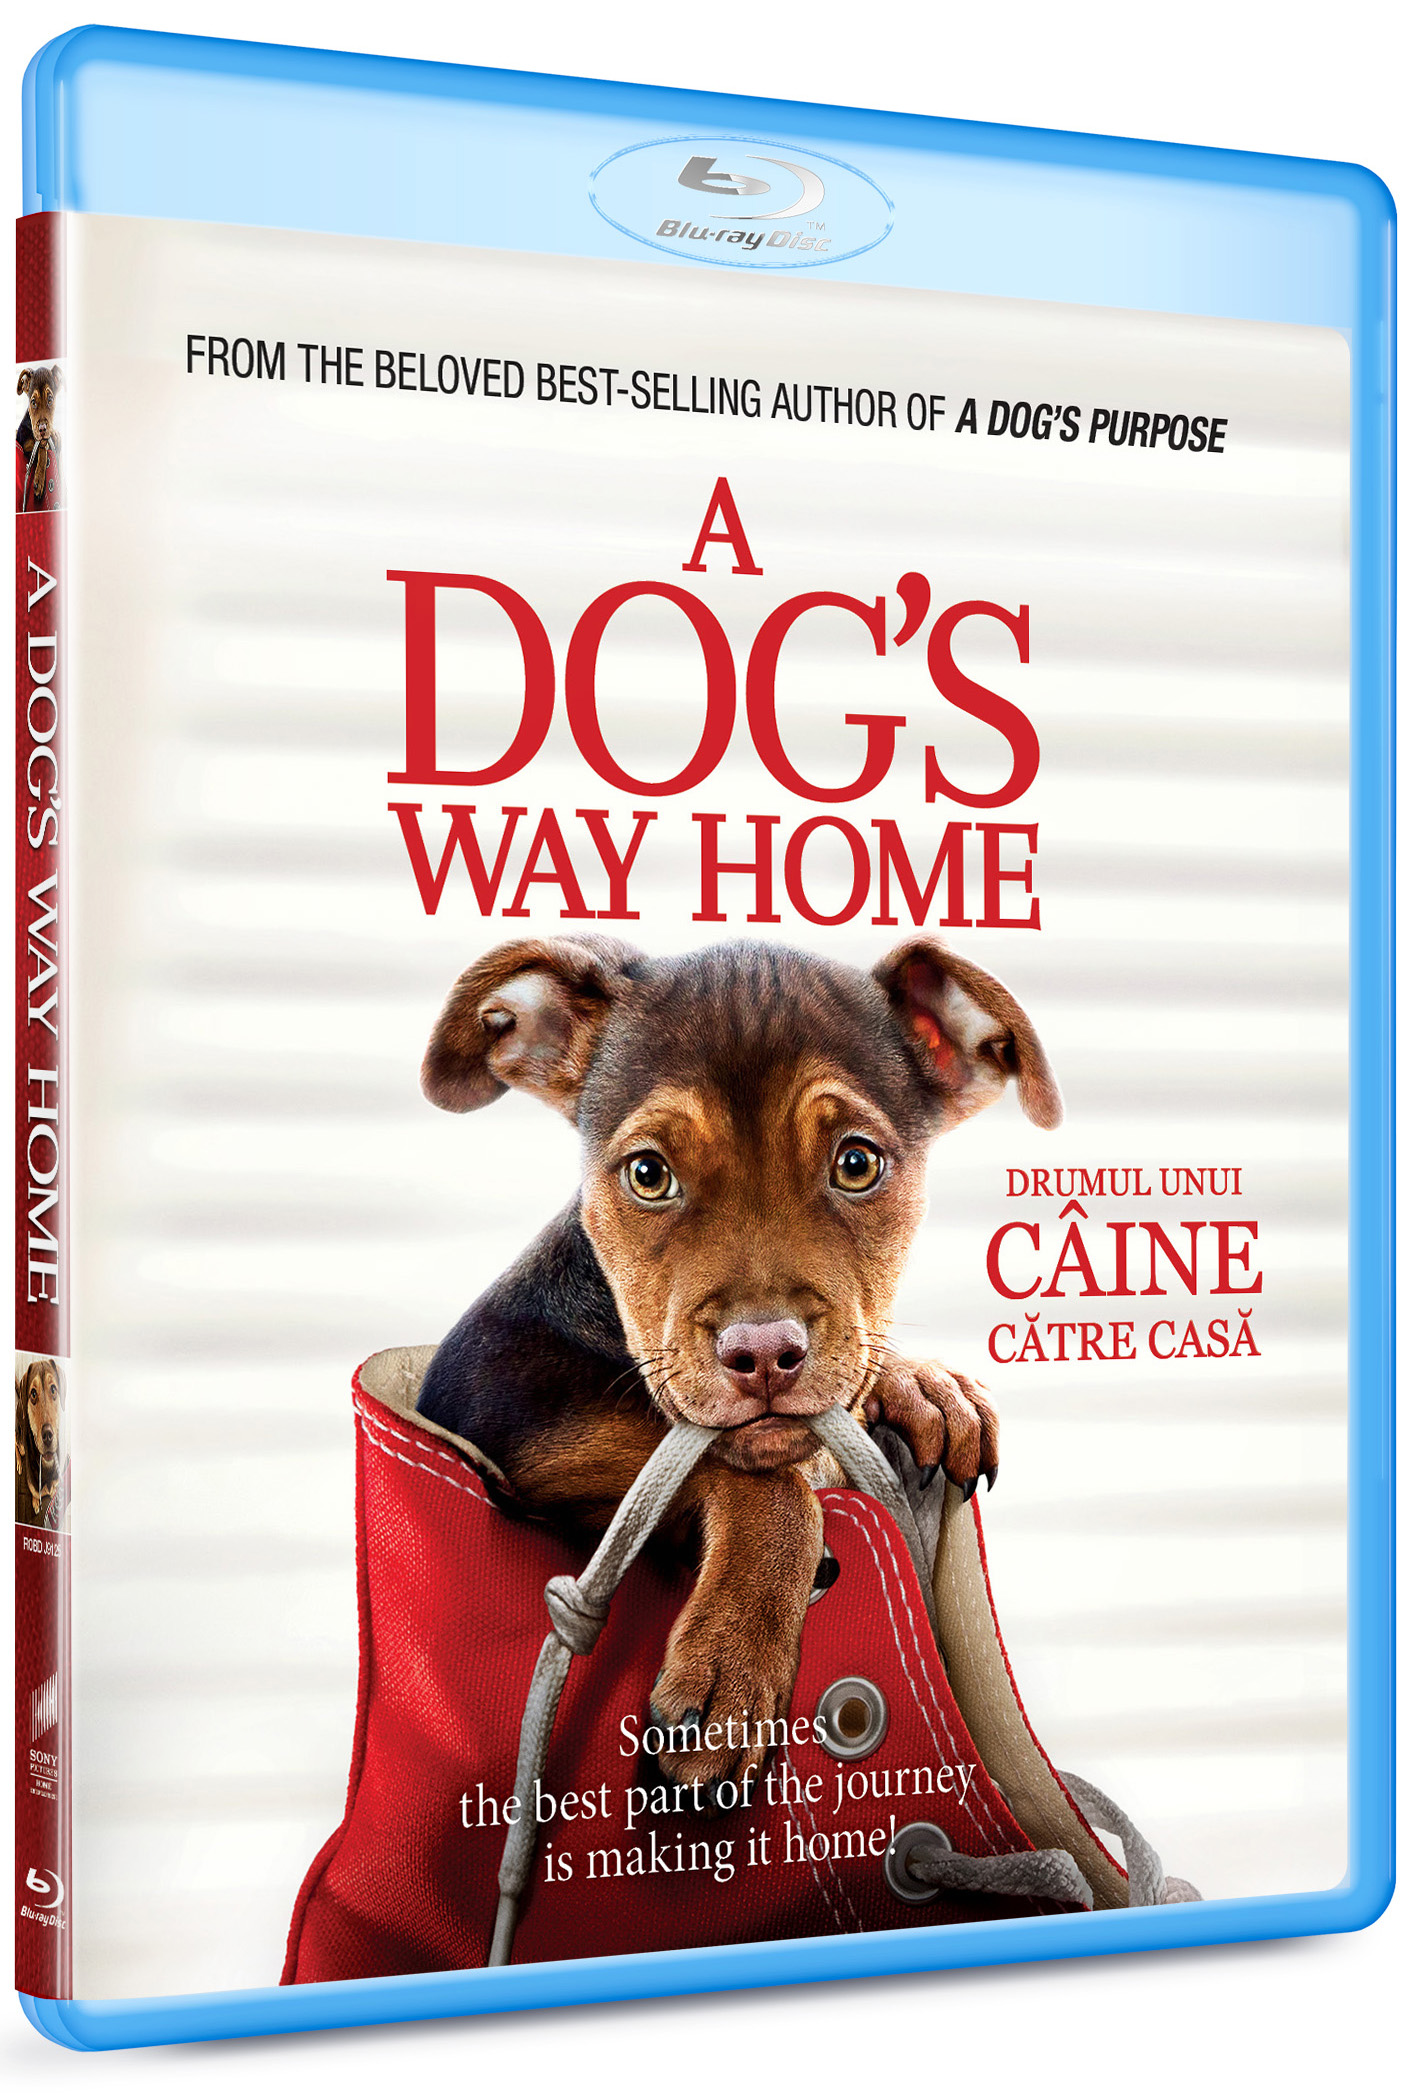 Drumul unui caine catre casa / A Dog's Way Home (Blu-Ray Disc) | Charles Martin Smith